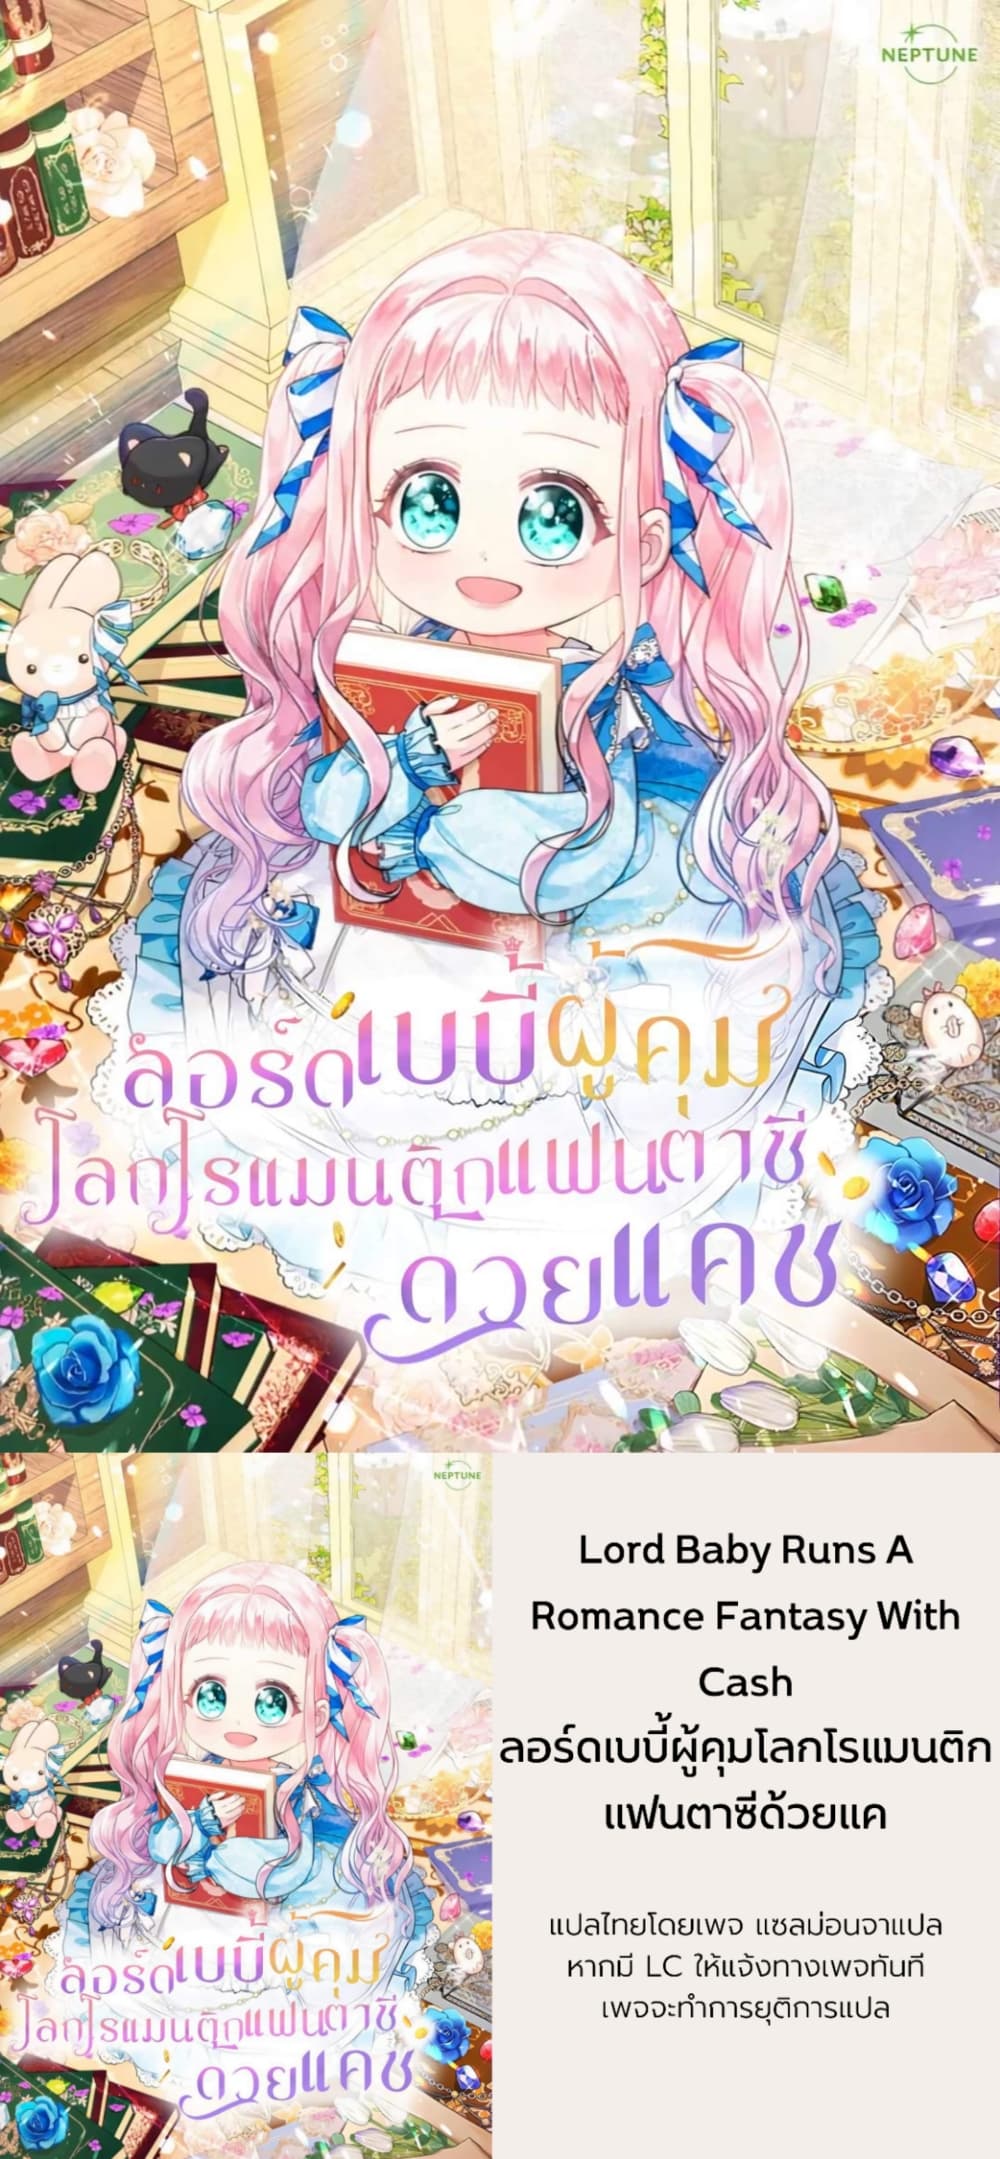 Lord Baby Runs a Romance Fantasy With Cash 16-16